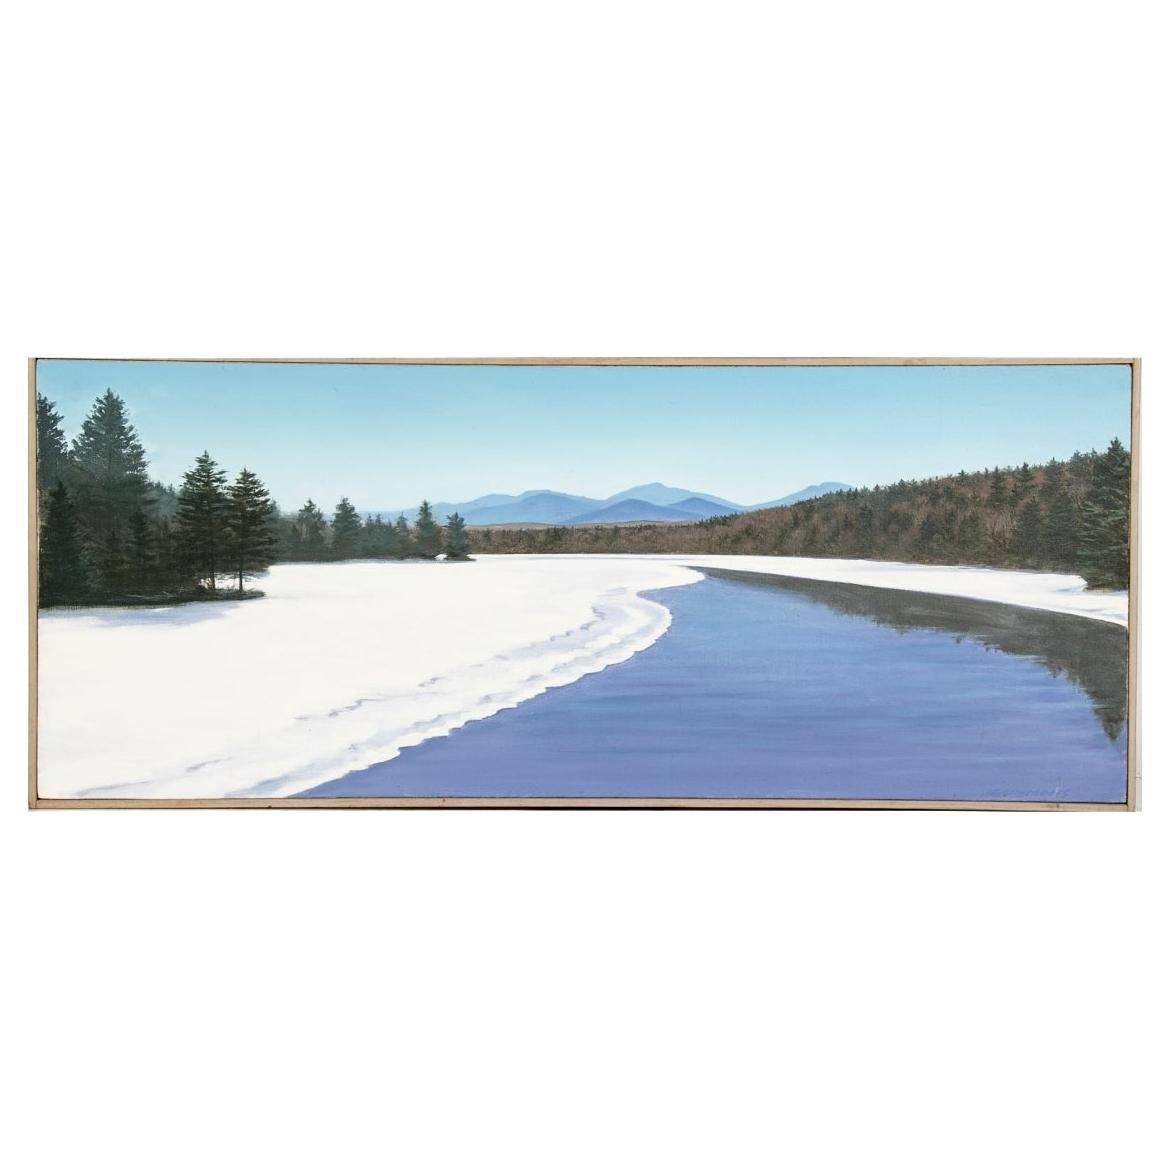 J.E. Simmons, Contemporary Oil on Canvas, "January Thaw"